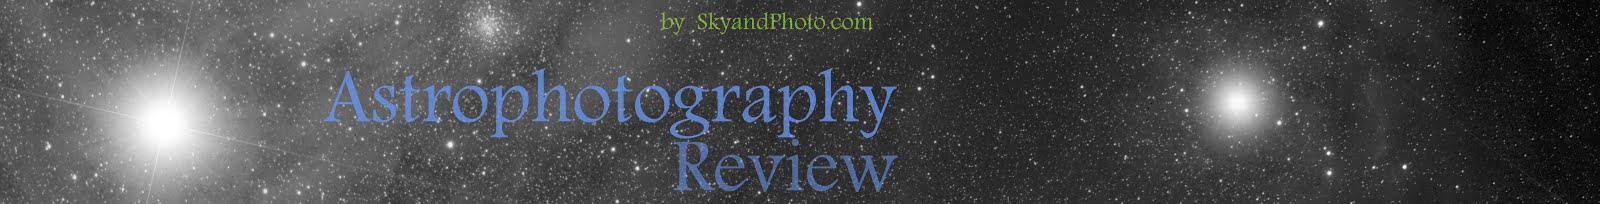 Astrophotography Review 